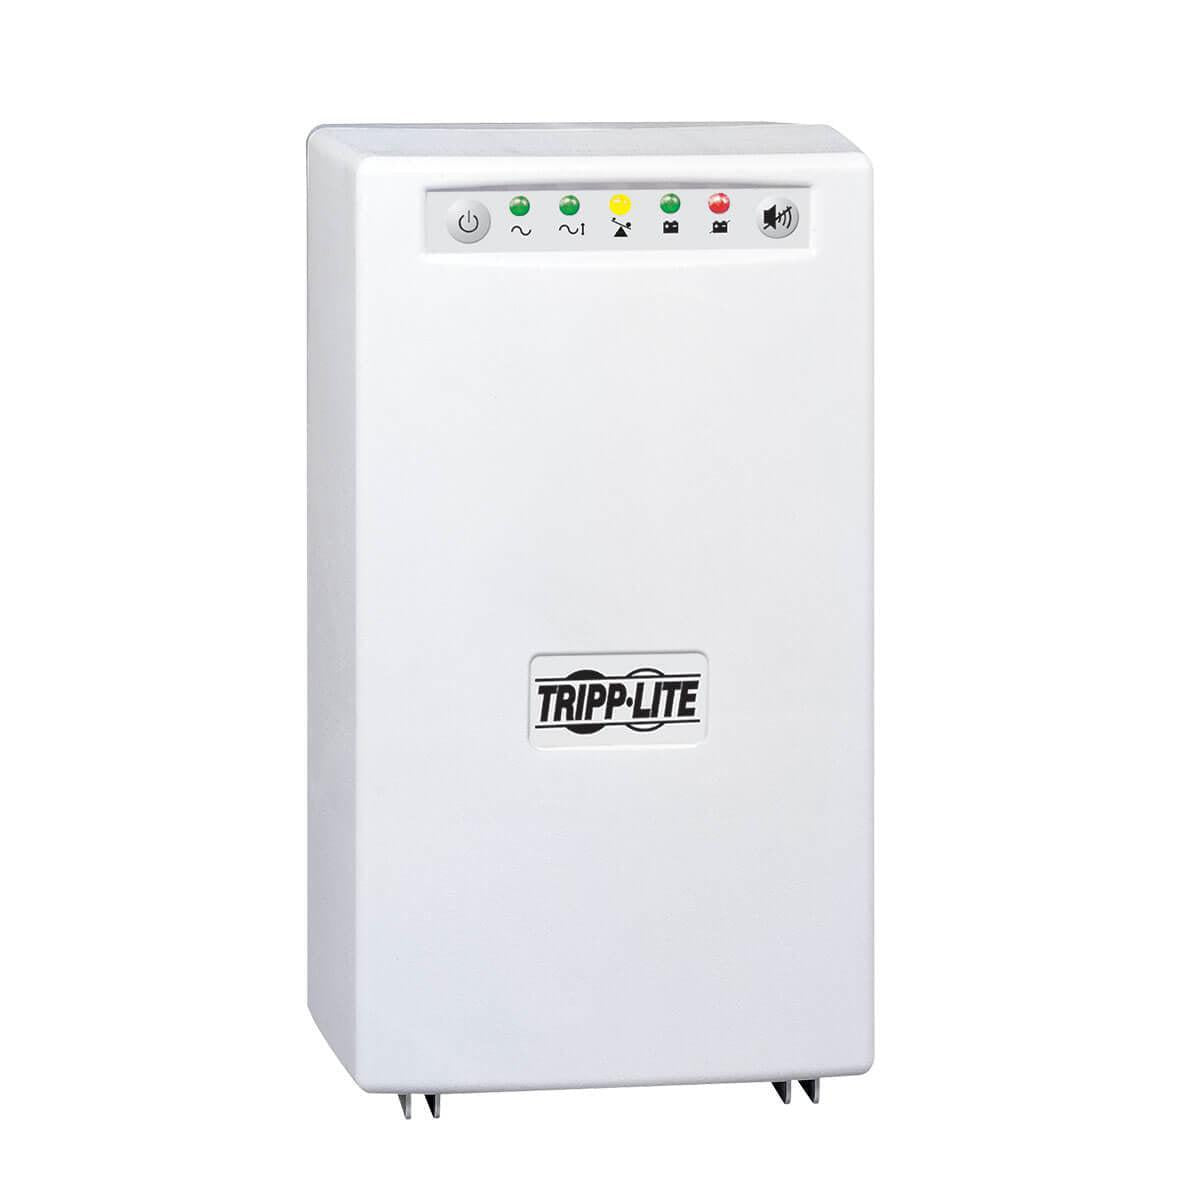 Tripp Lite Smartpro 120V 1Kva 750W Medical-Grade Line-Interactive Tower Ups With 4 Outlets, Full Isolation, Usb, Lithium Battery